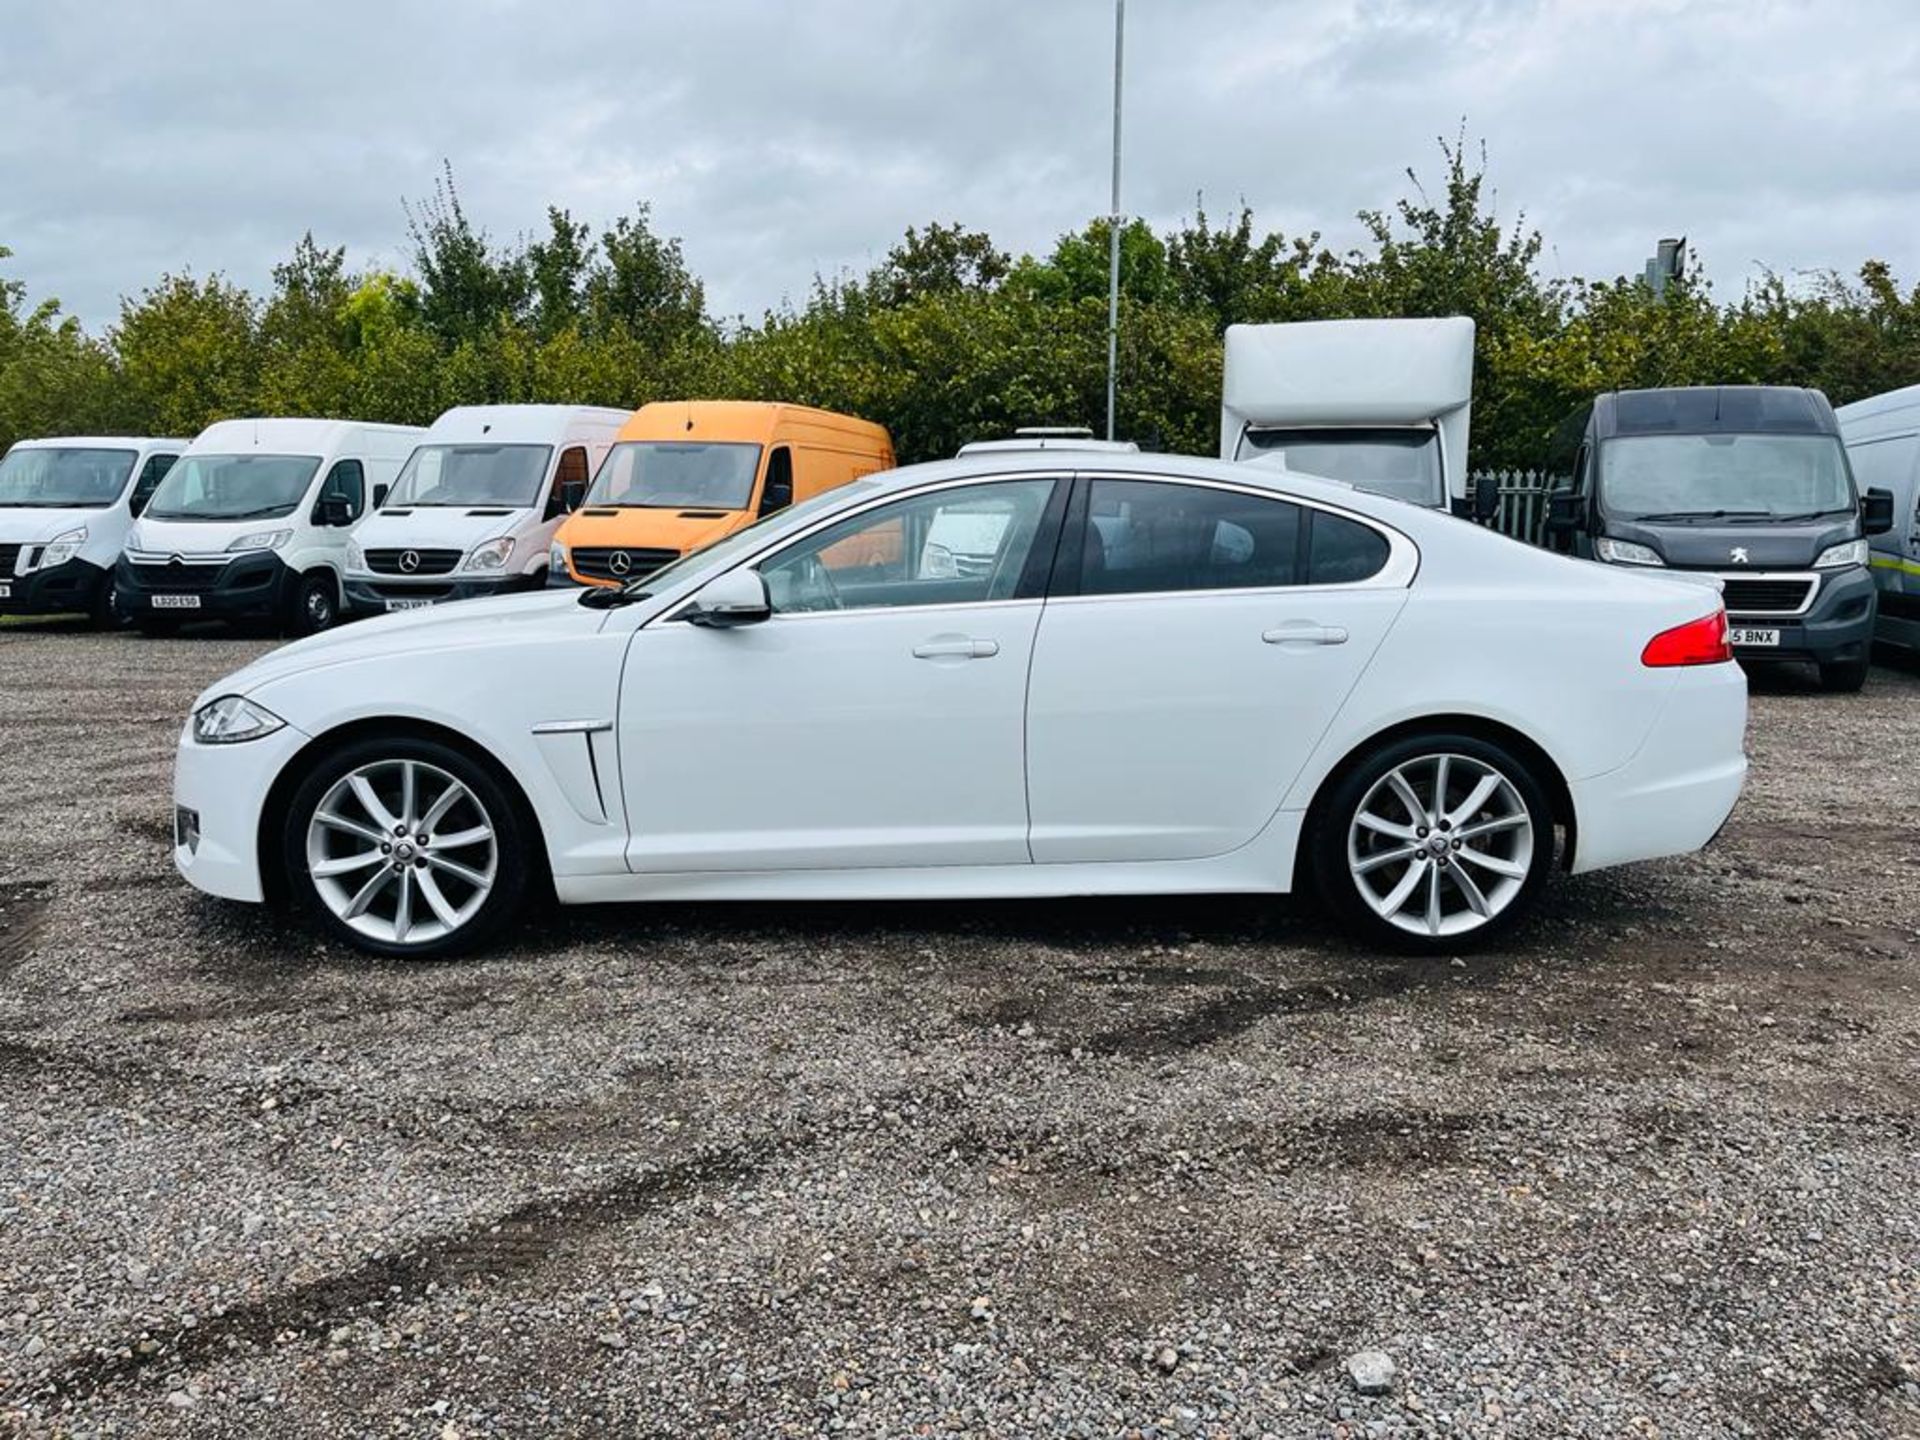 ** ON SALE ** Jaguar XF Sport D 200 2.2 2013 "63 Reg" - Air Conditioning - Touch Screen System - Image 4 of 30